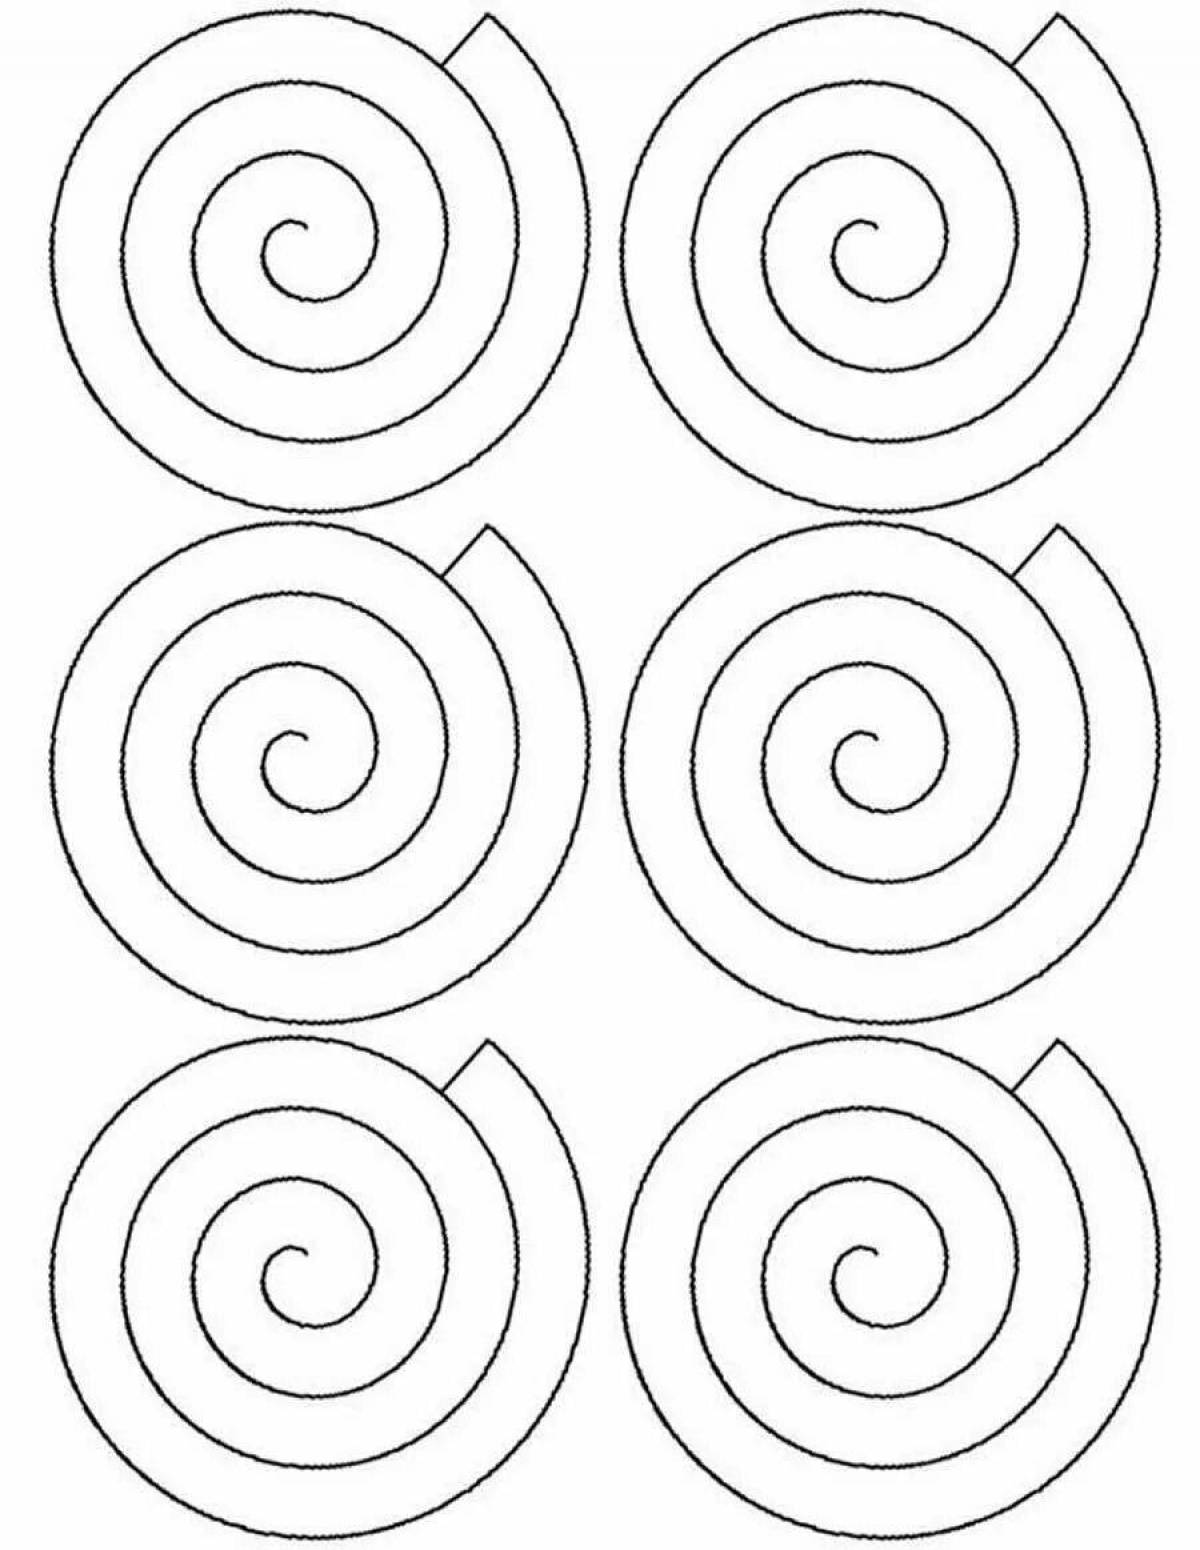 Glorious genshin spiral coloring page